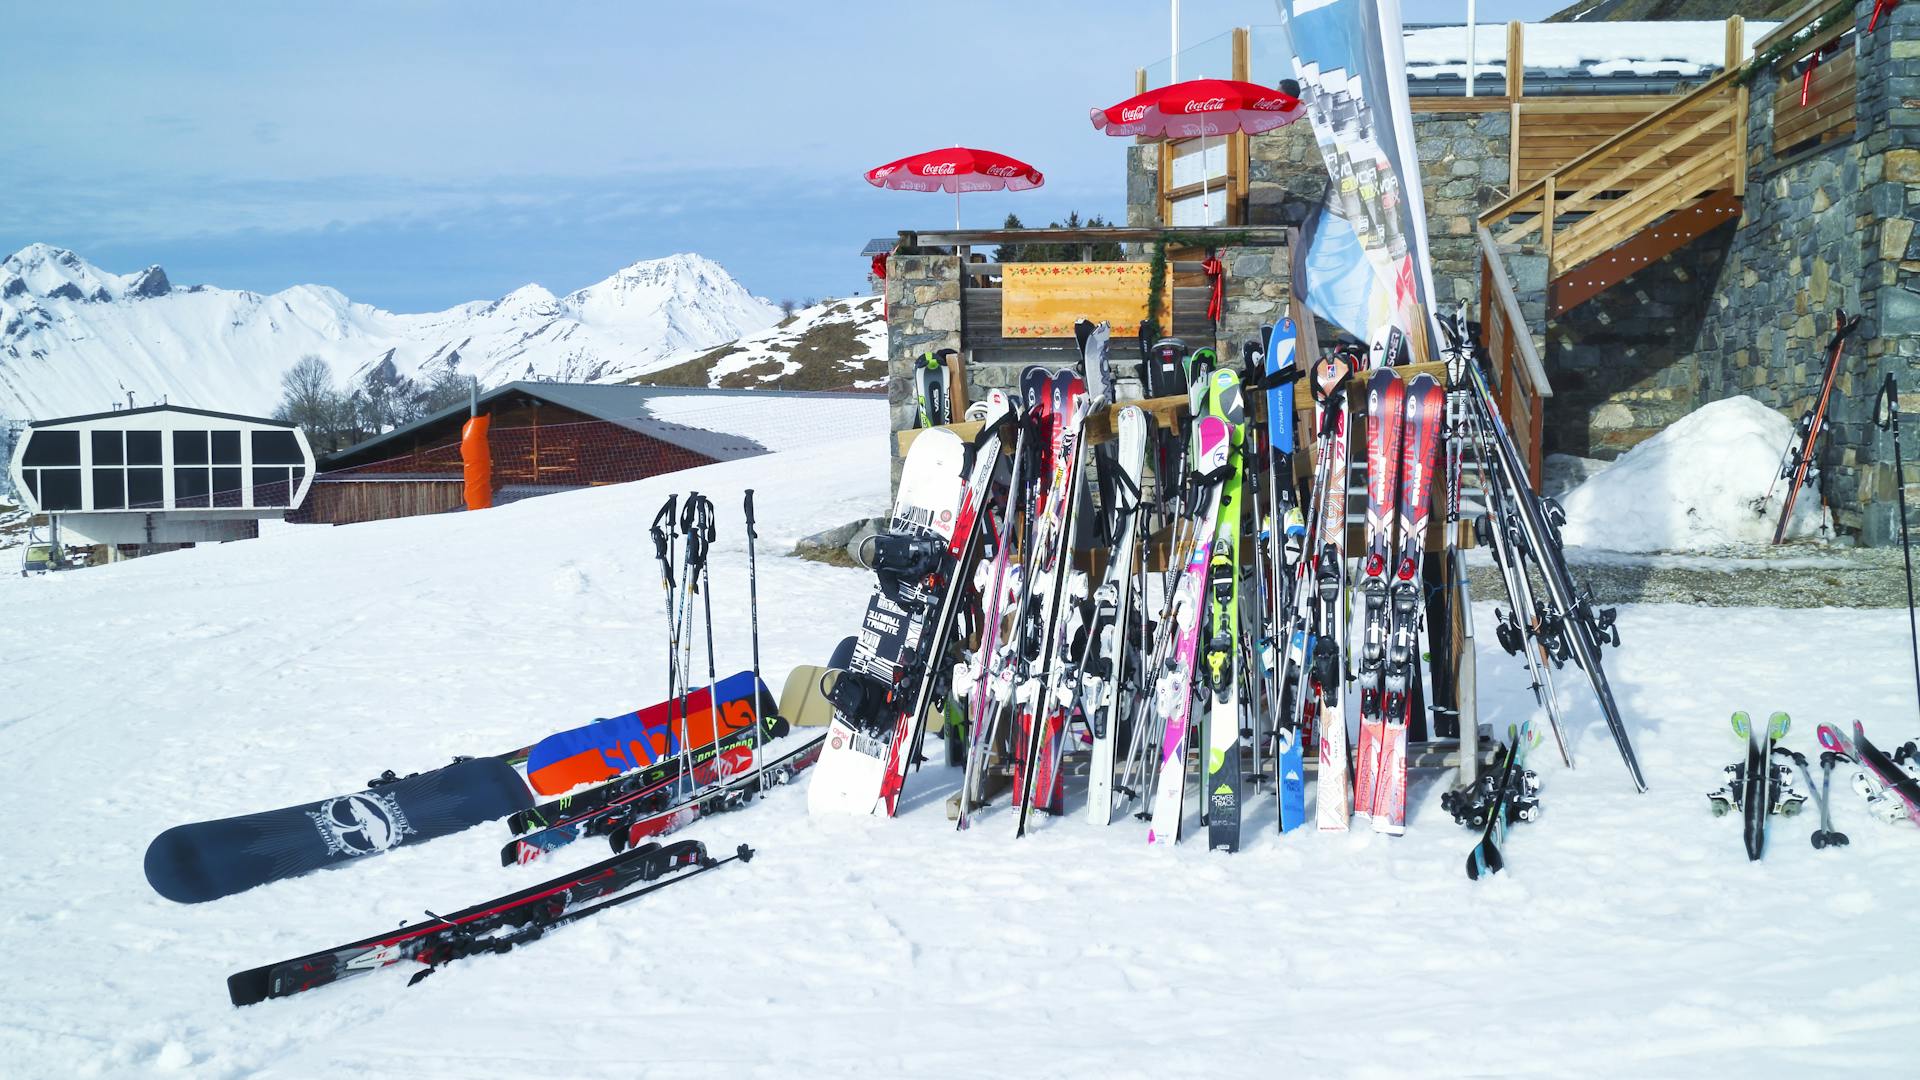 Ski rack overflowing with skis and snowboards